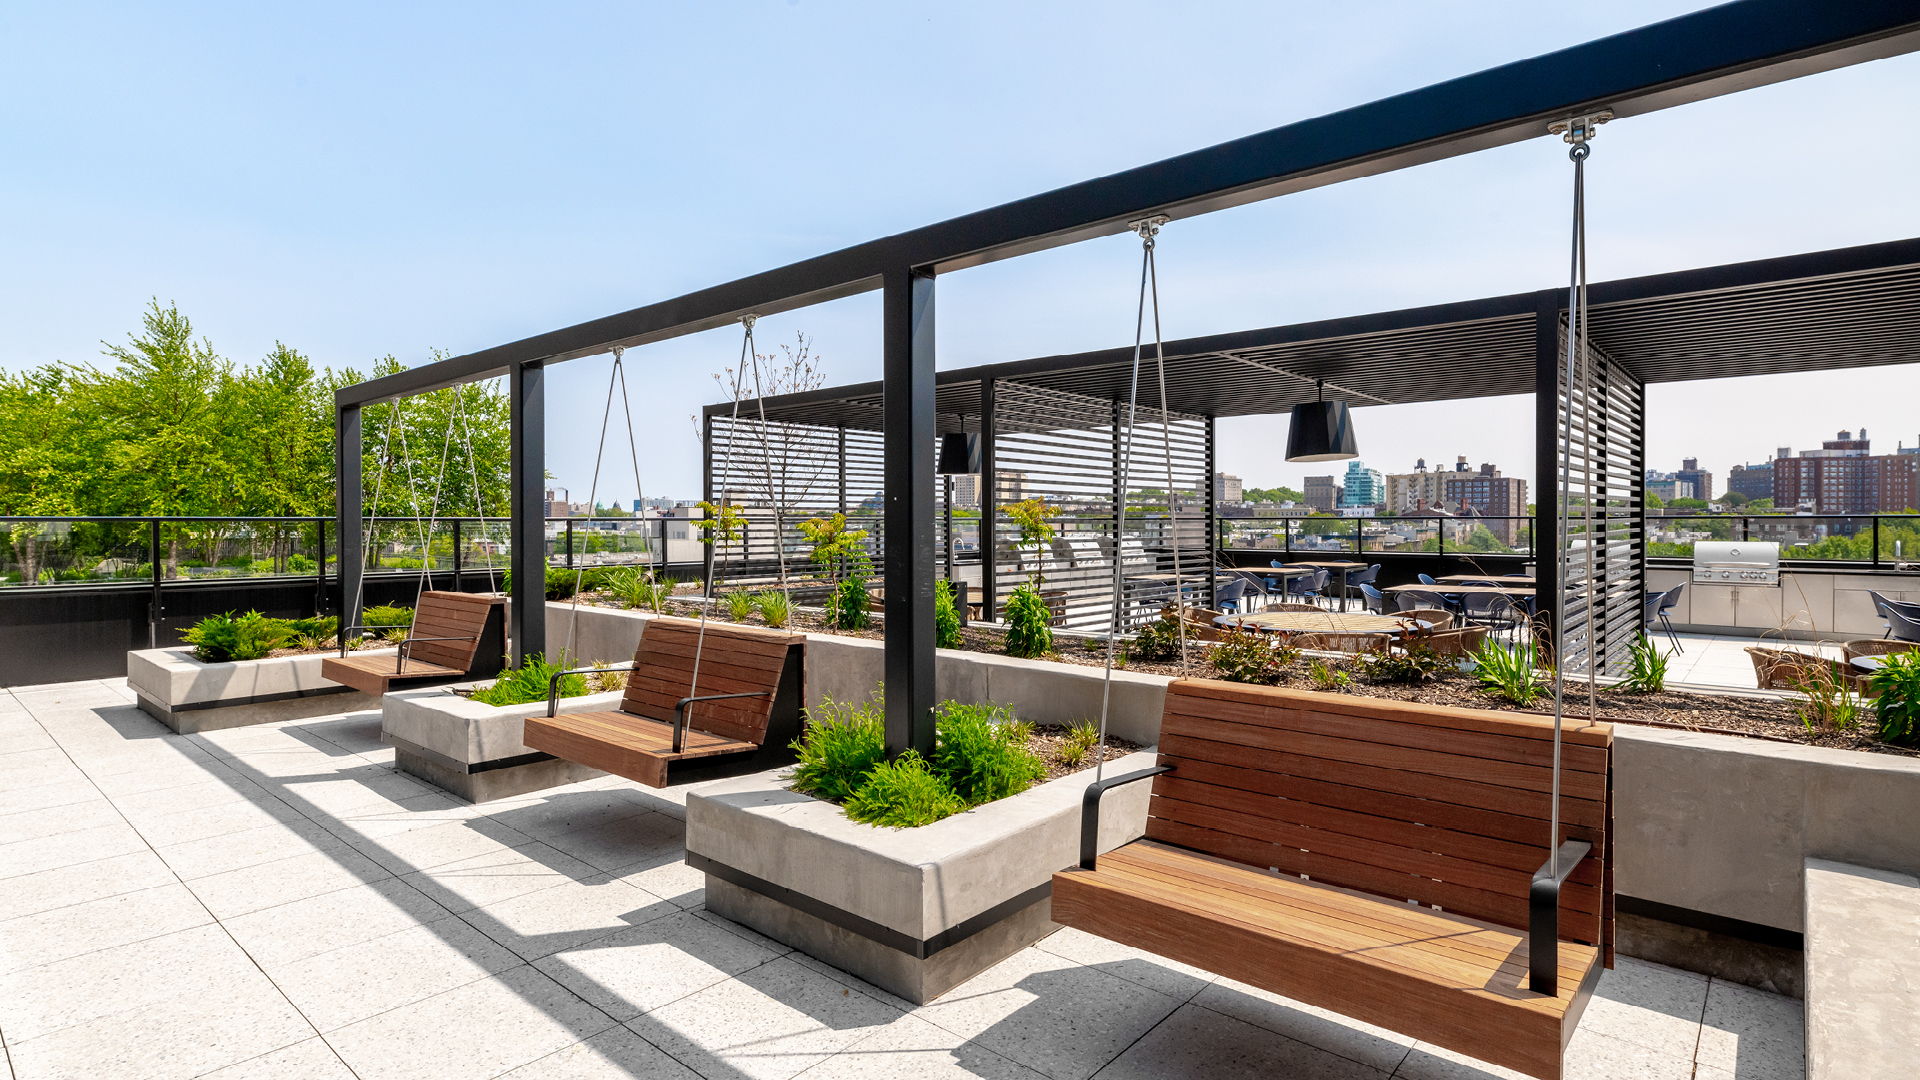 Roofdeck swings and cabanas